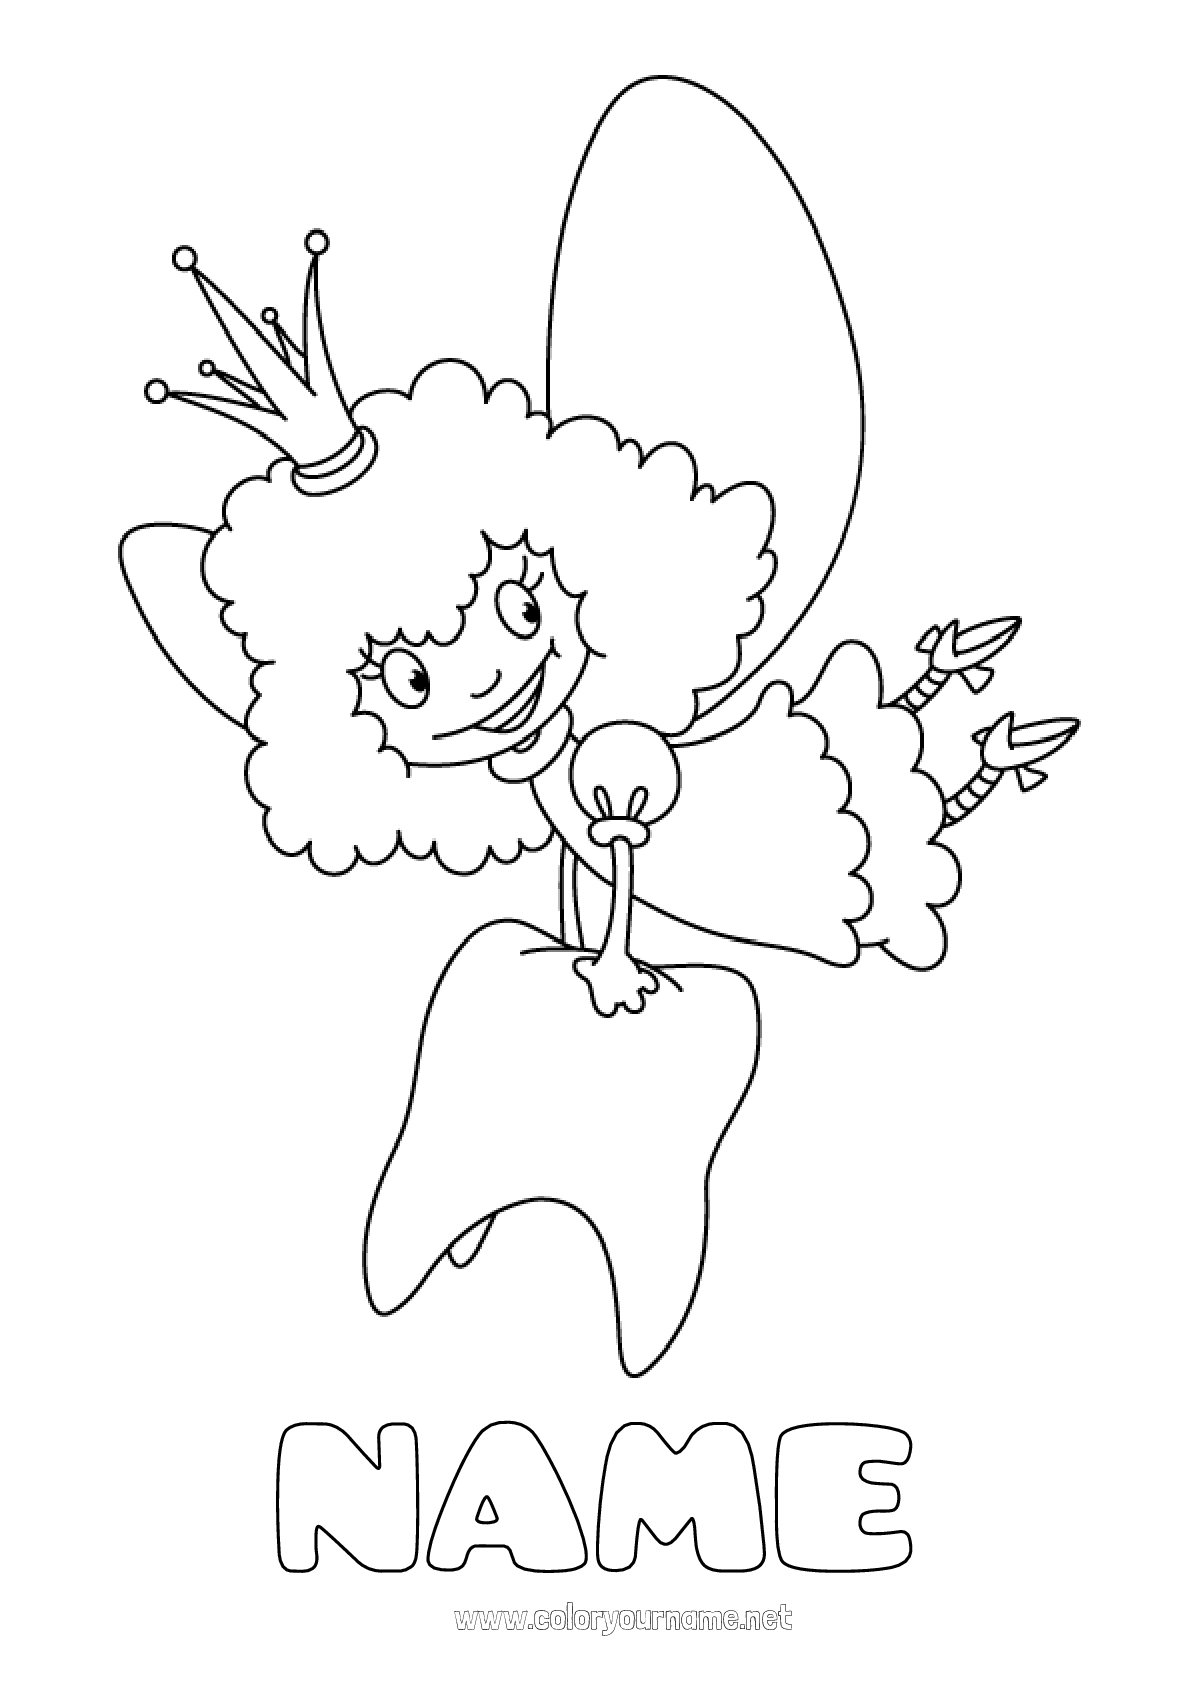 coloring-page-no-496-milk-tooth-tooth-fairy-tooth-fairy